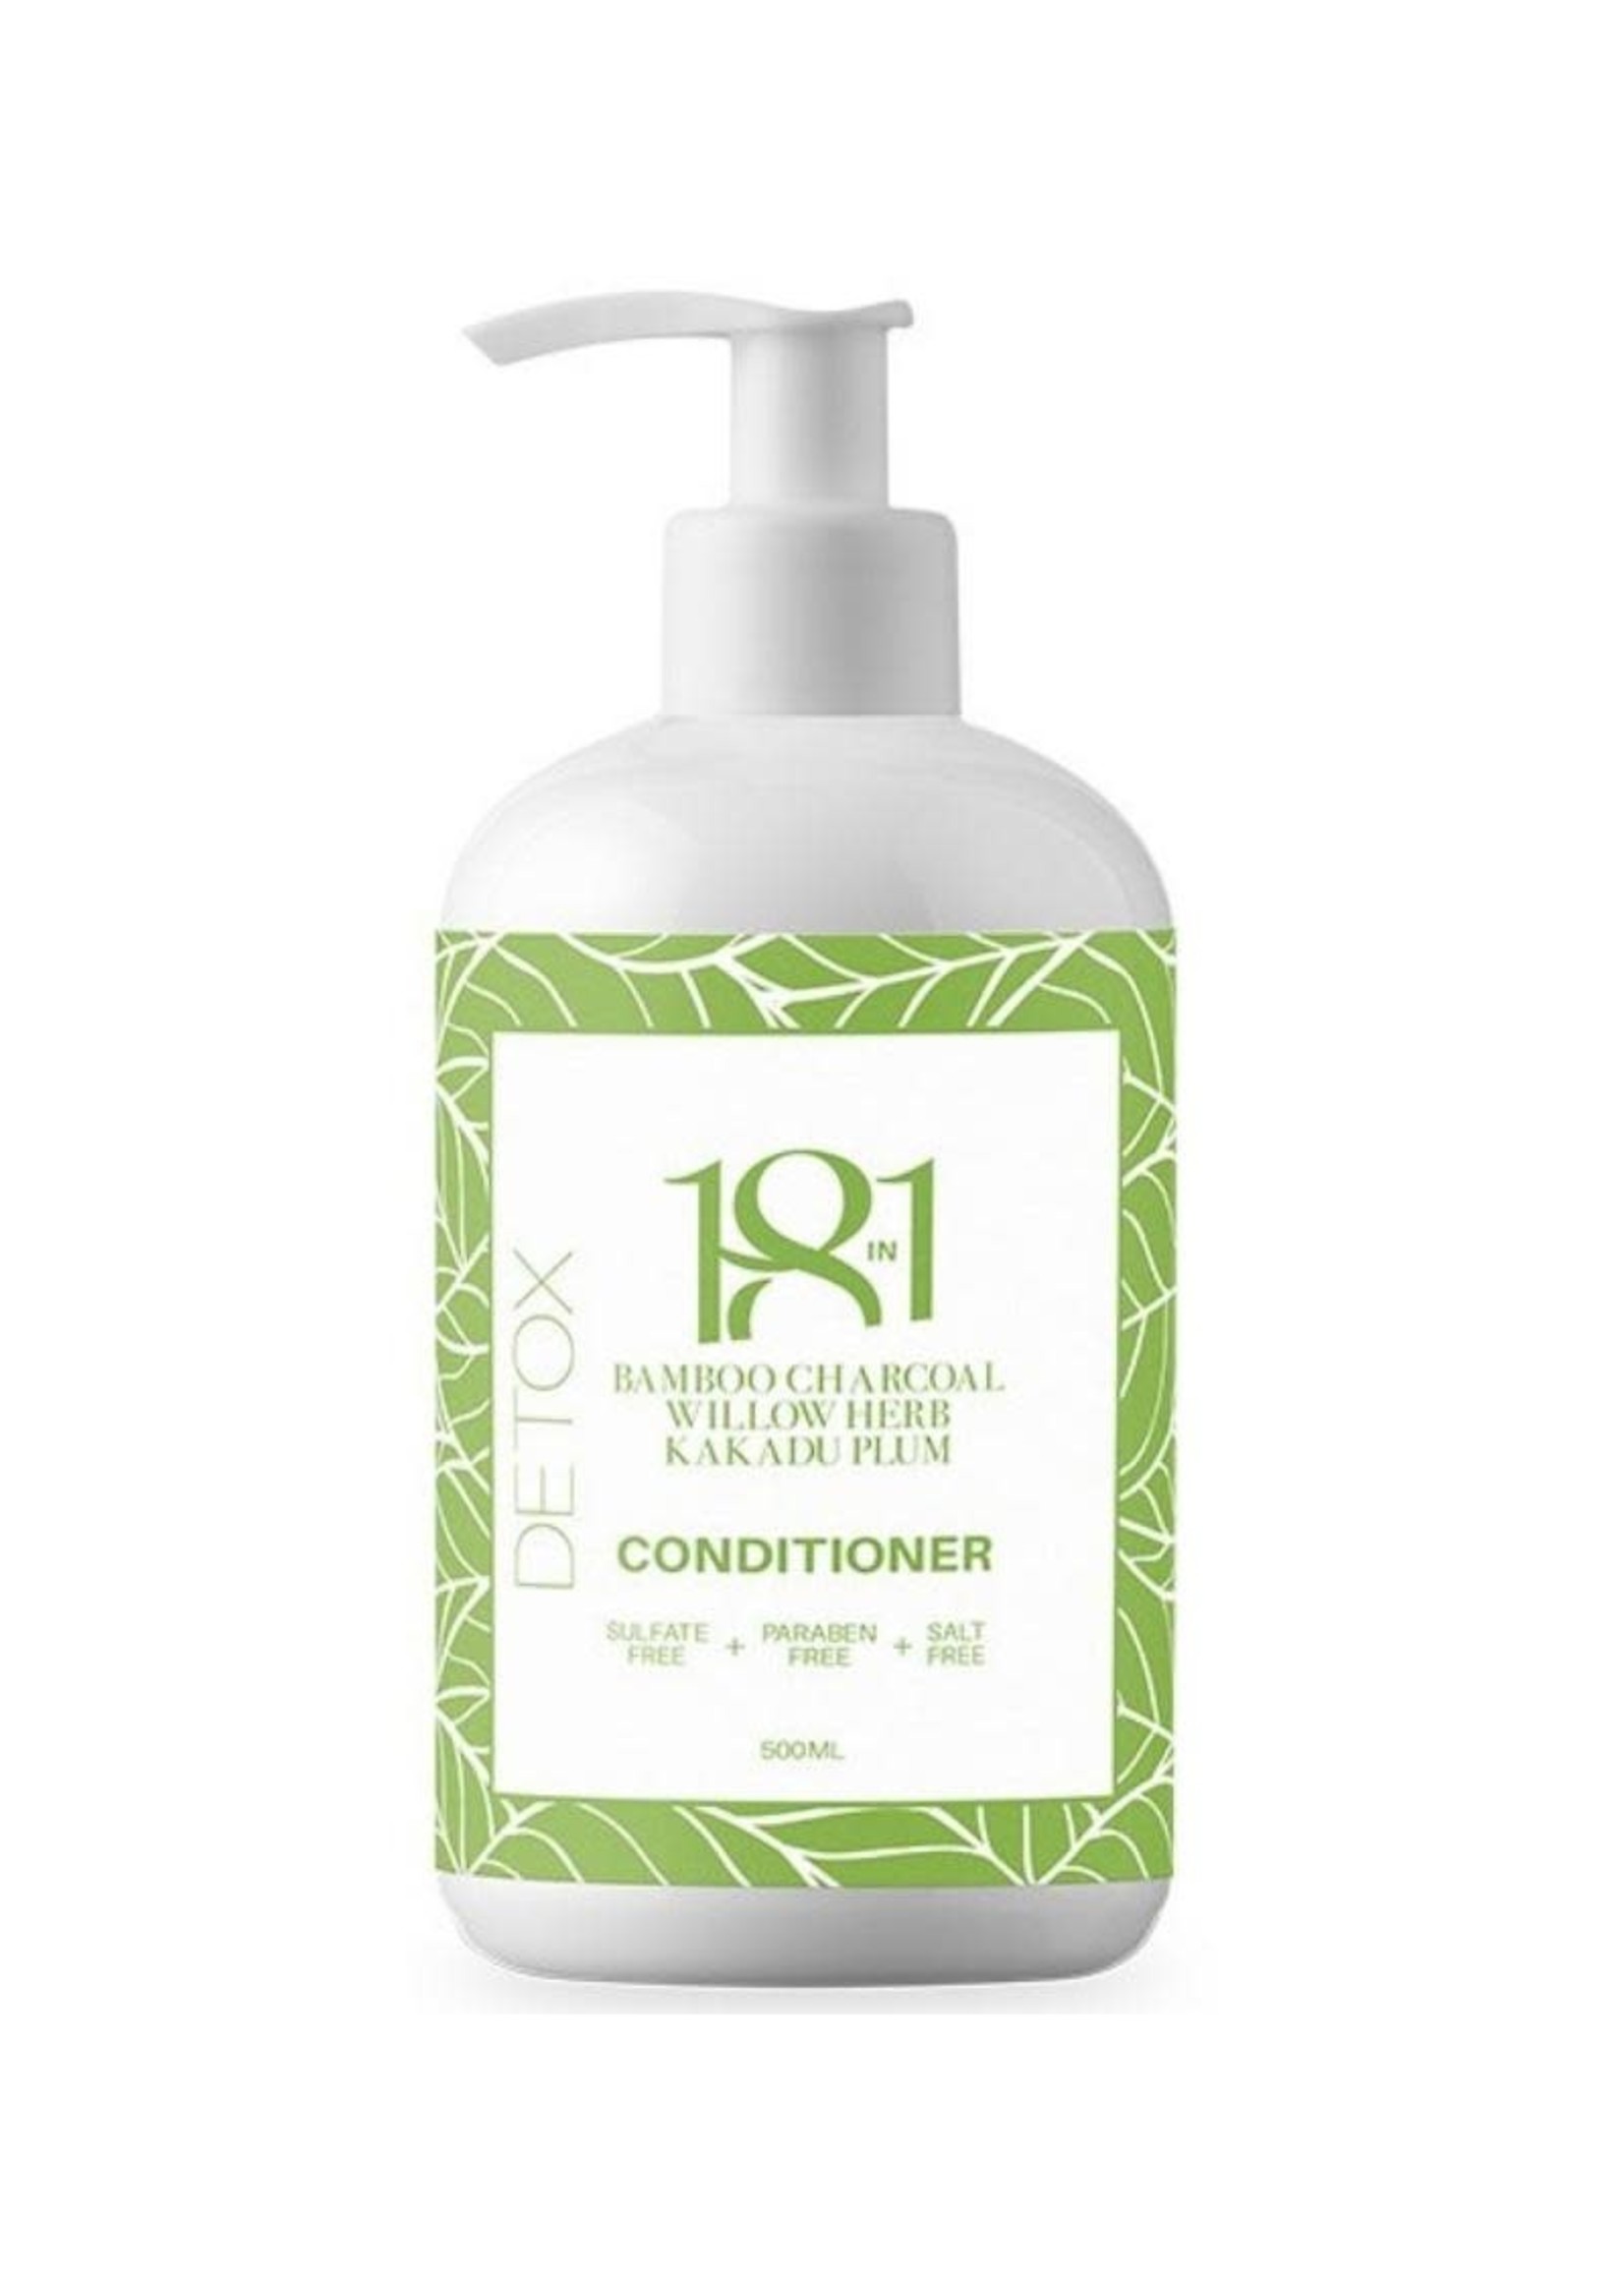 18 in 1 Detox Bamboo Charcoal Conditioner 500ml